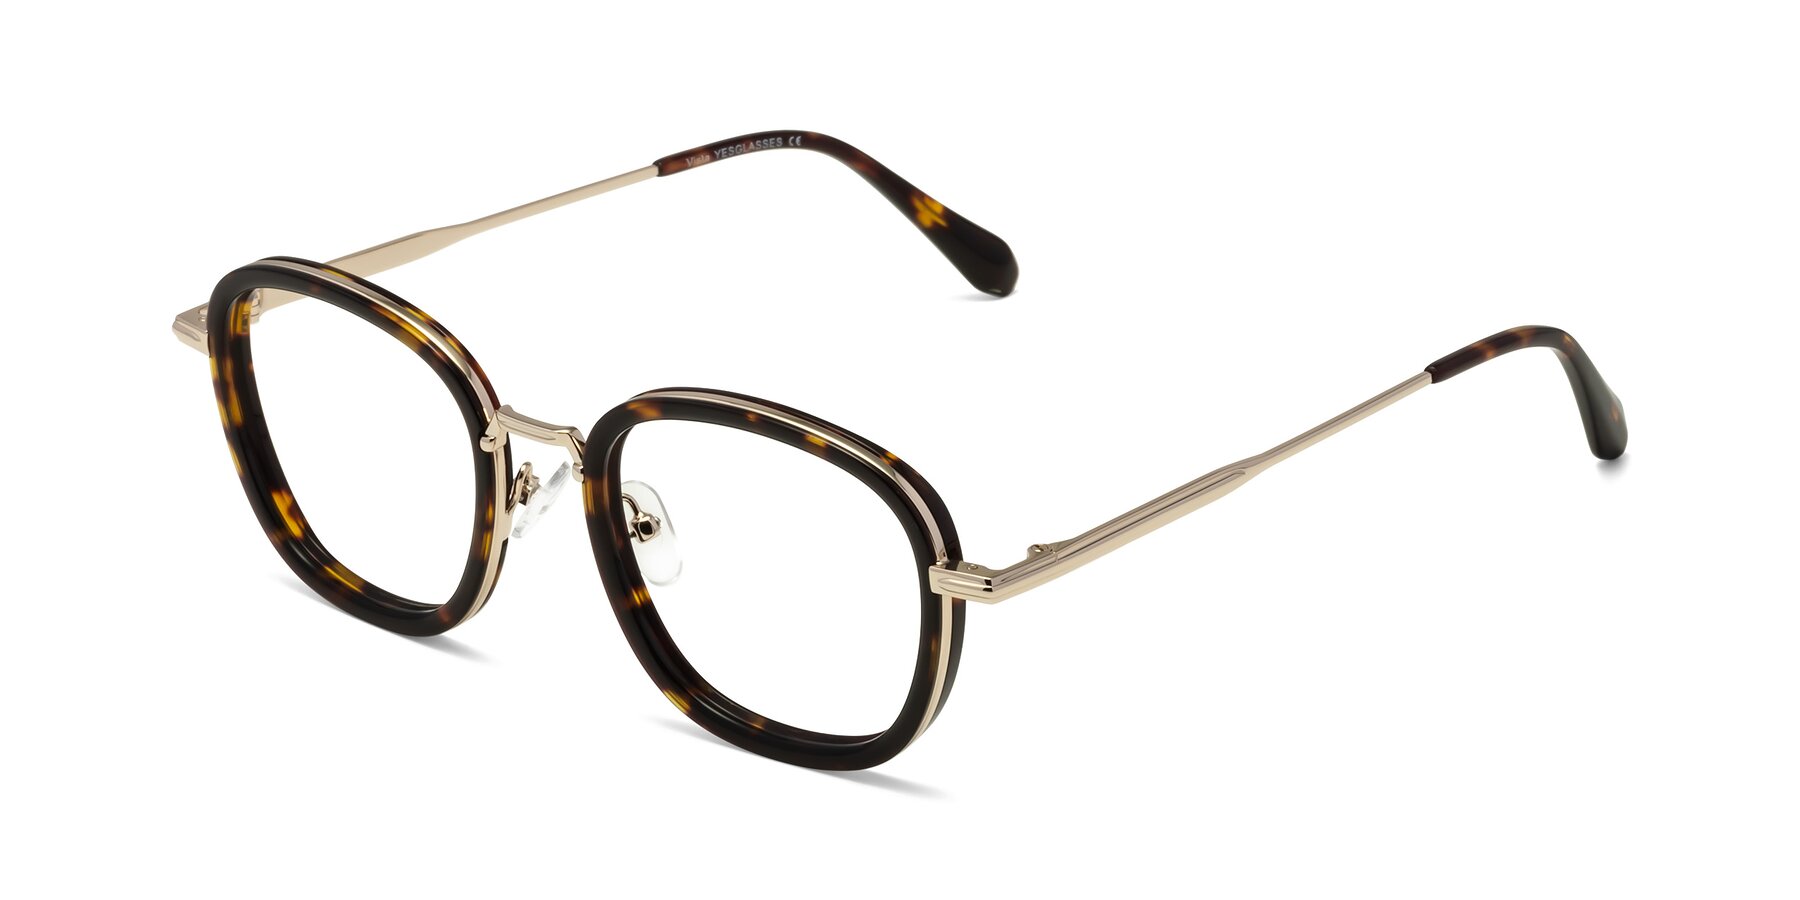 Angle of Vista in Tortoise-Light Gold with Clear Blue Light Blocking Lenses